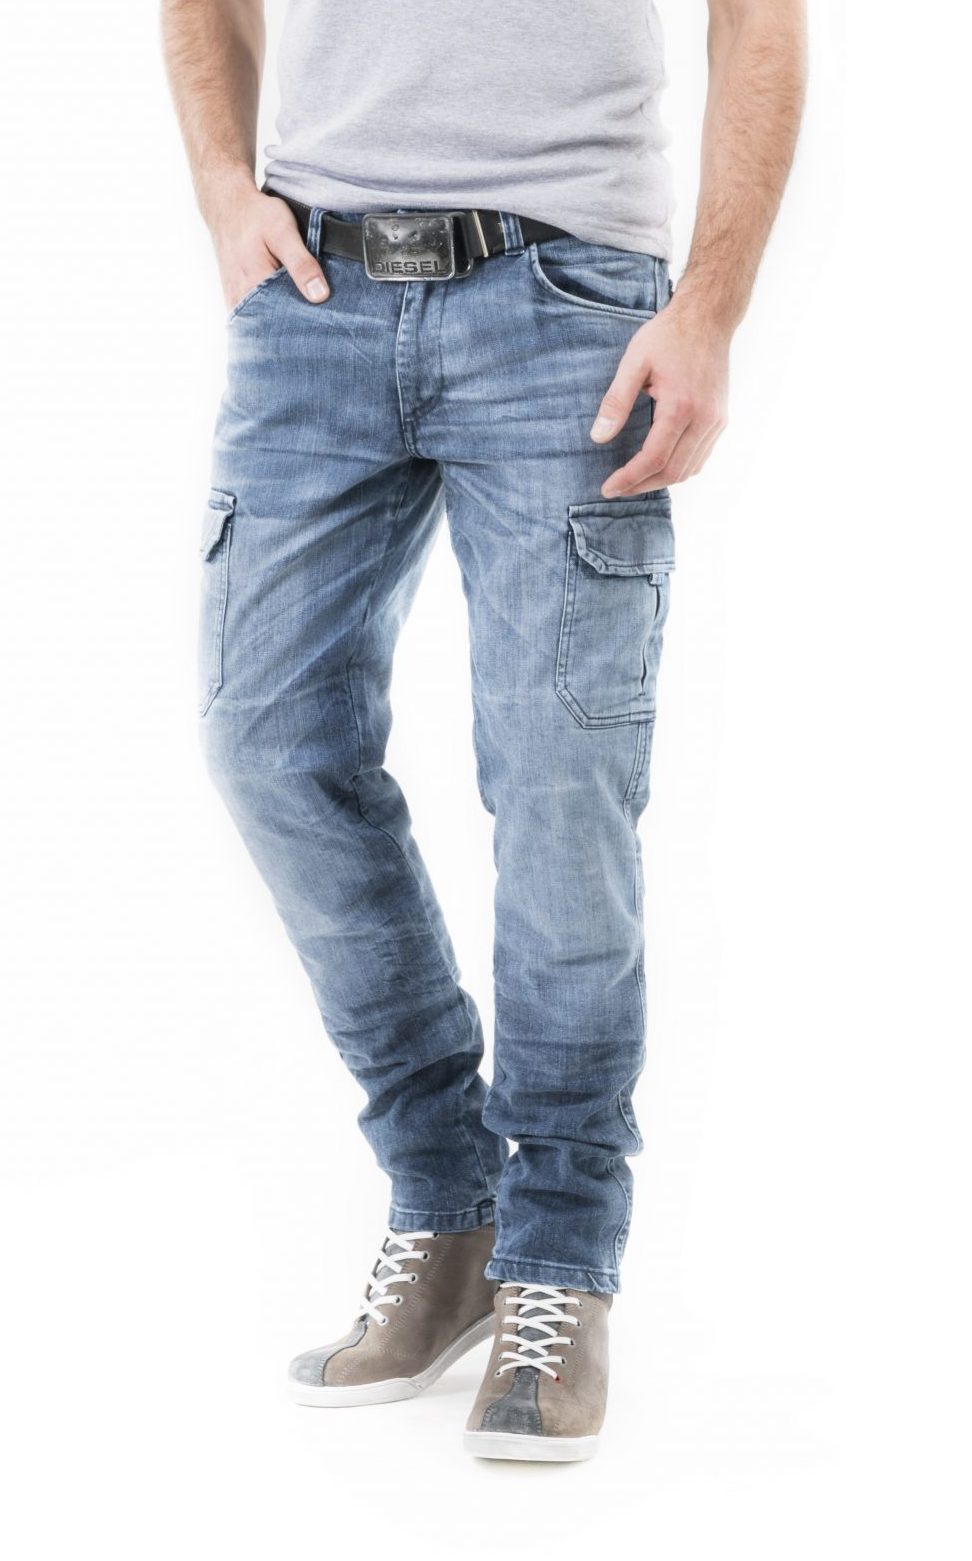 cargo motorcycle jeans